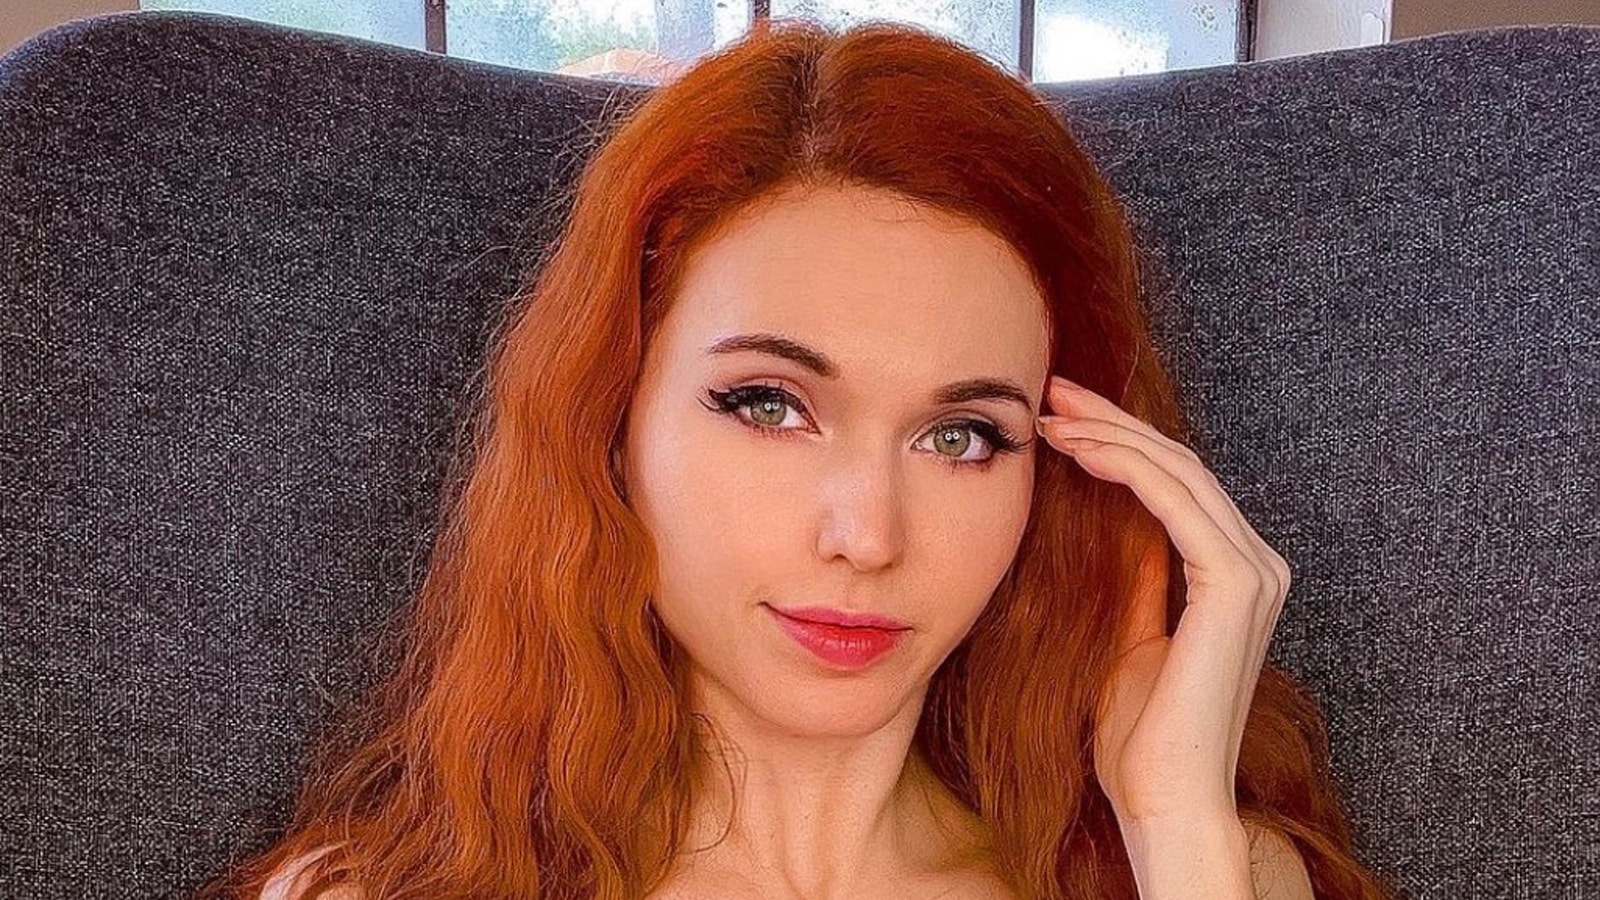 Does amouranth have an onlyfans